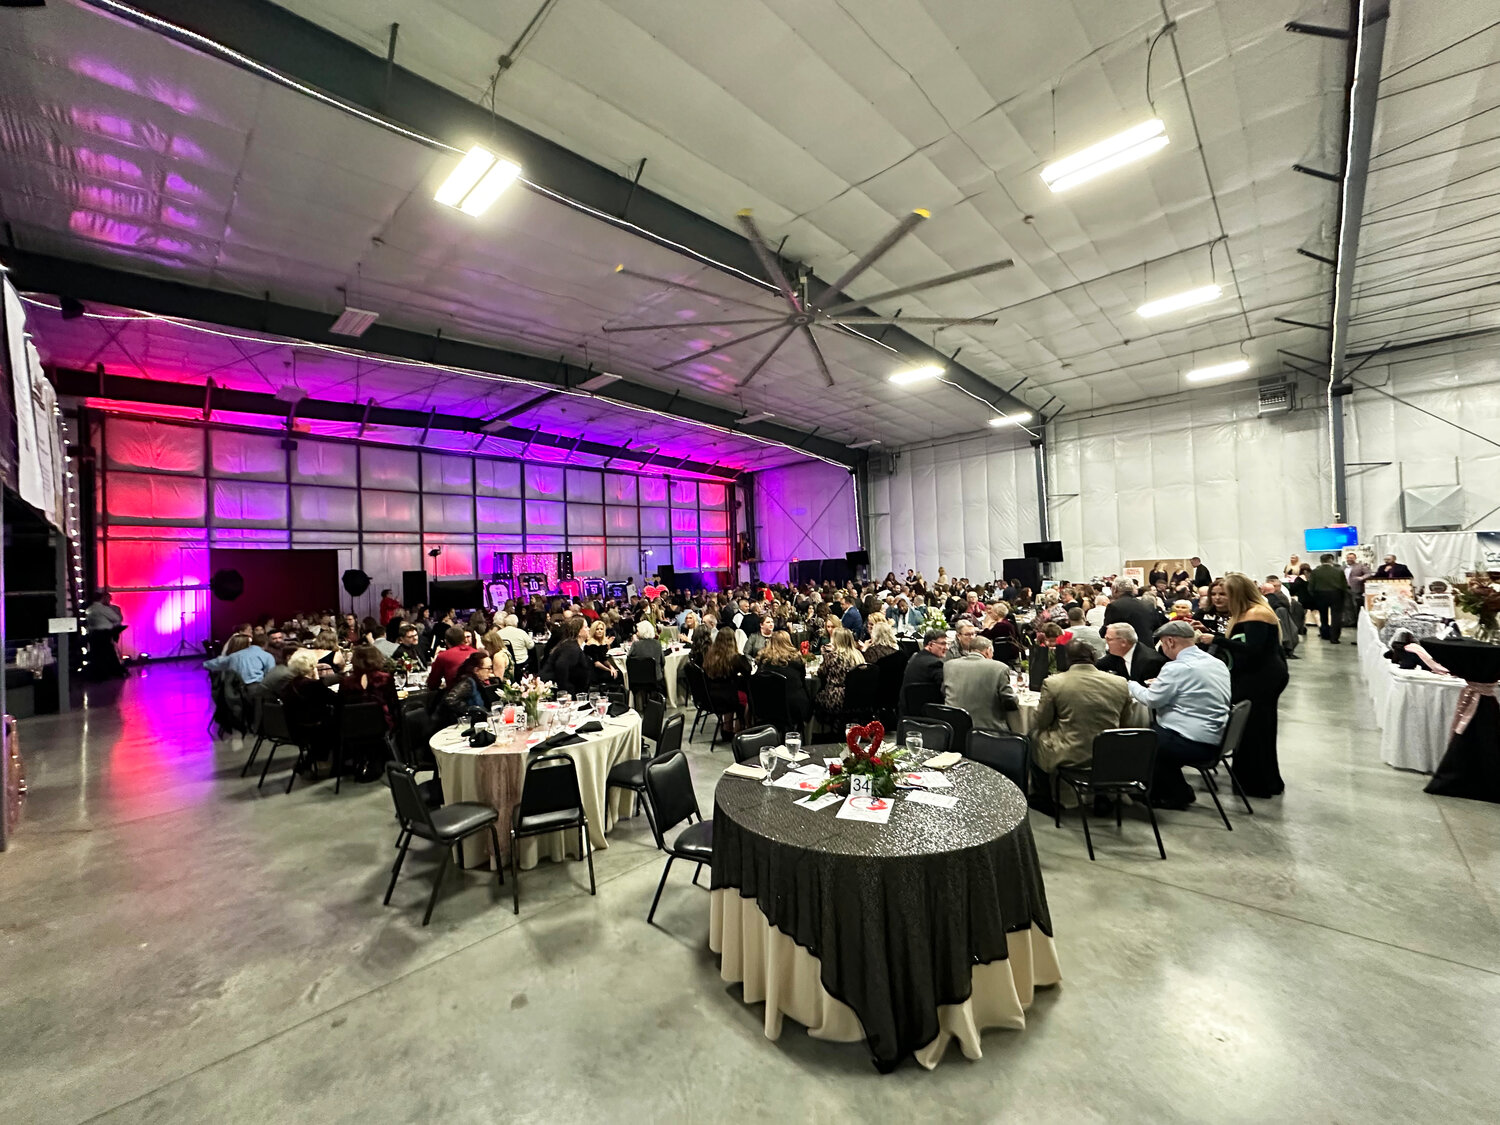 The 16th annual From the Heart Gala & Auction was held Saturday, Feb. 3 at the hangar at Flight Deck Bar & Grill in Rochelle. The event saw 311 people attend and raised a record $90,000, breaking its previous mark of $80,000 in 2023.